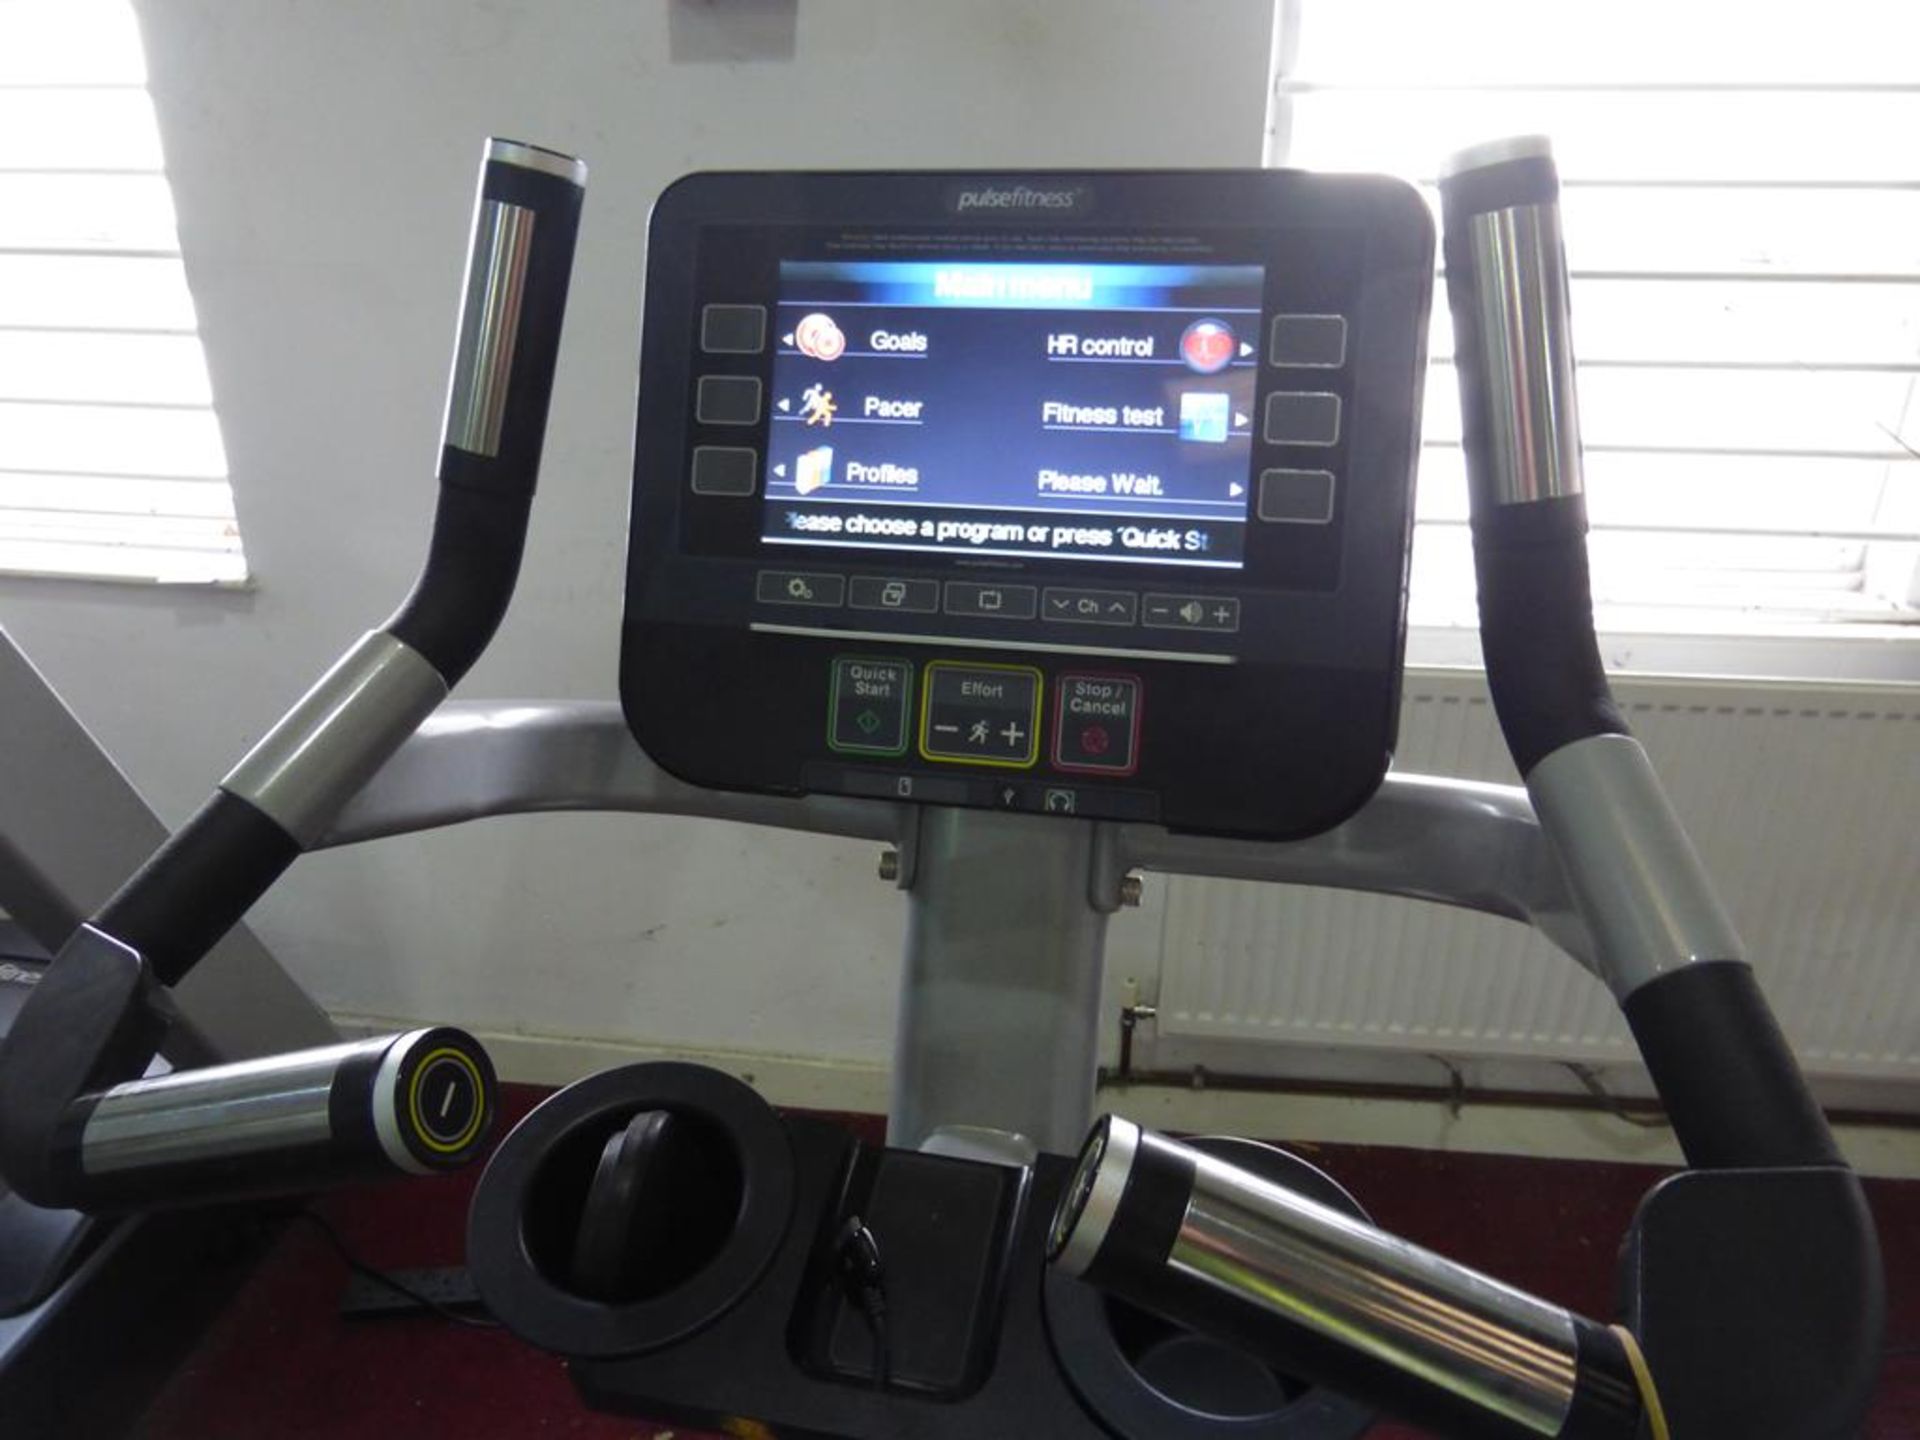 Pulse Fitness 240G U-Cycle Upright Cycle - Image 4 of 4